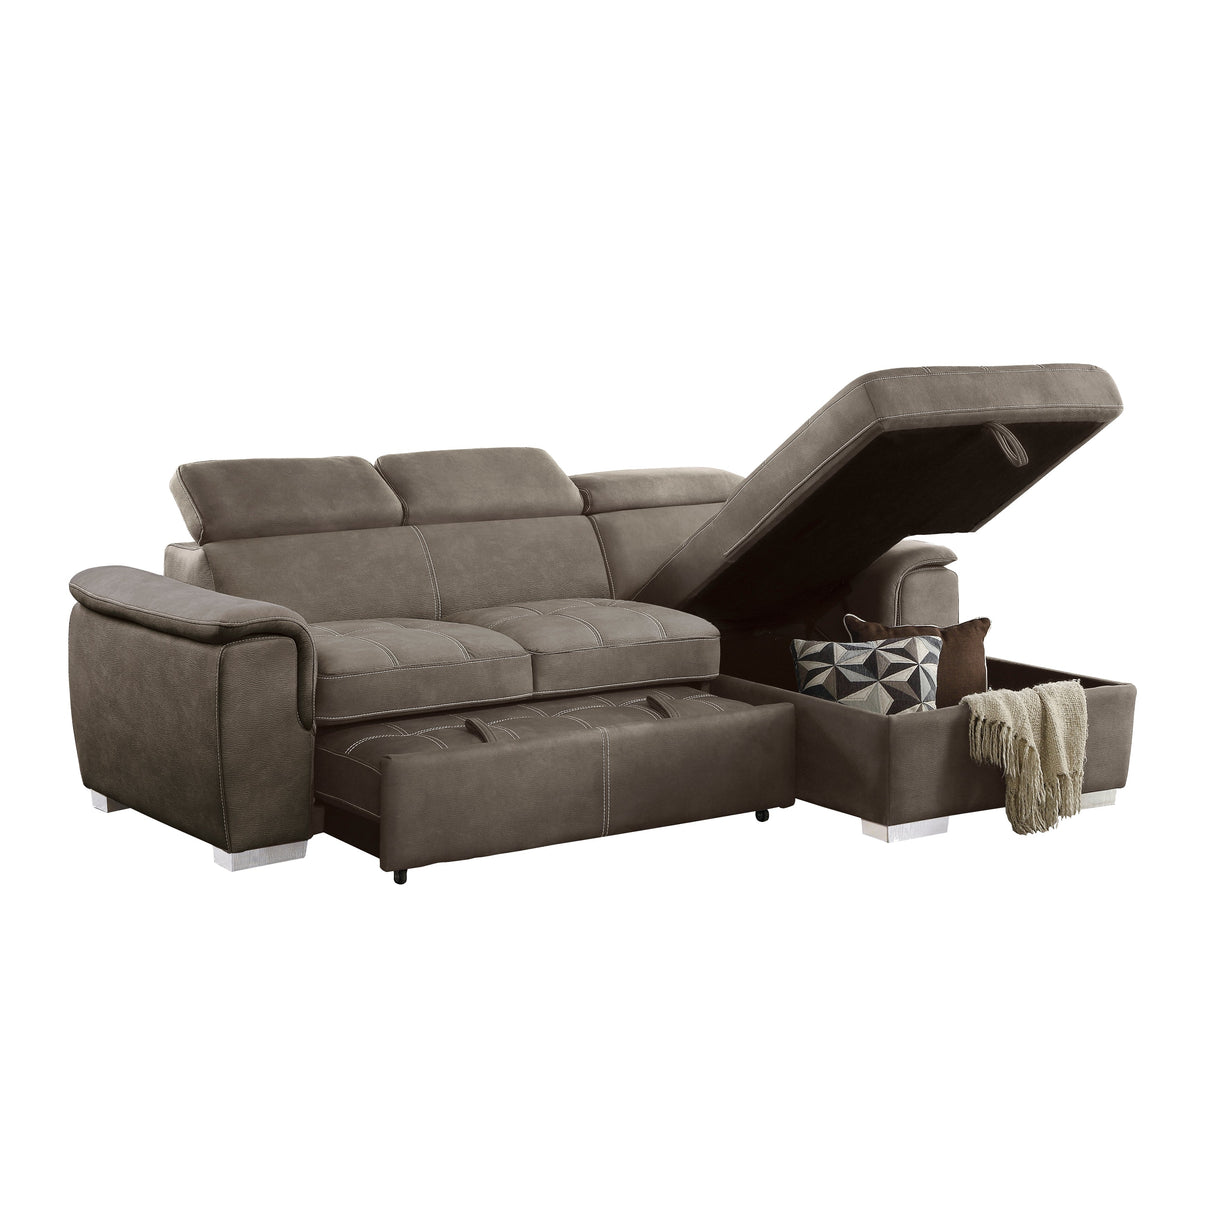 Ferriday Taupe Storage Sleeper Sectional